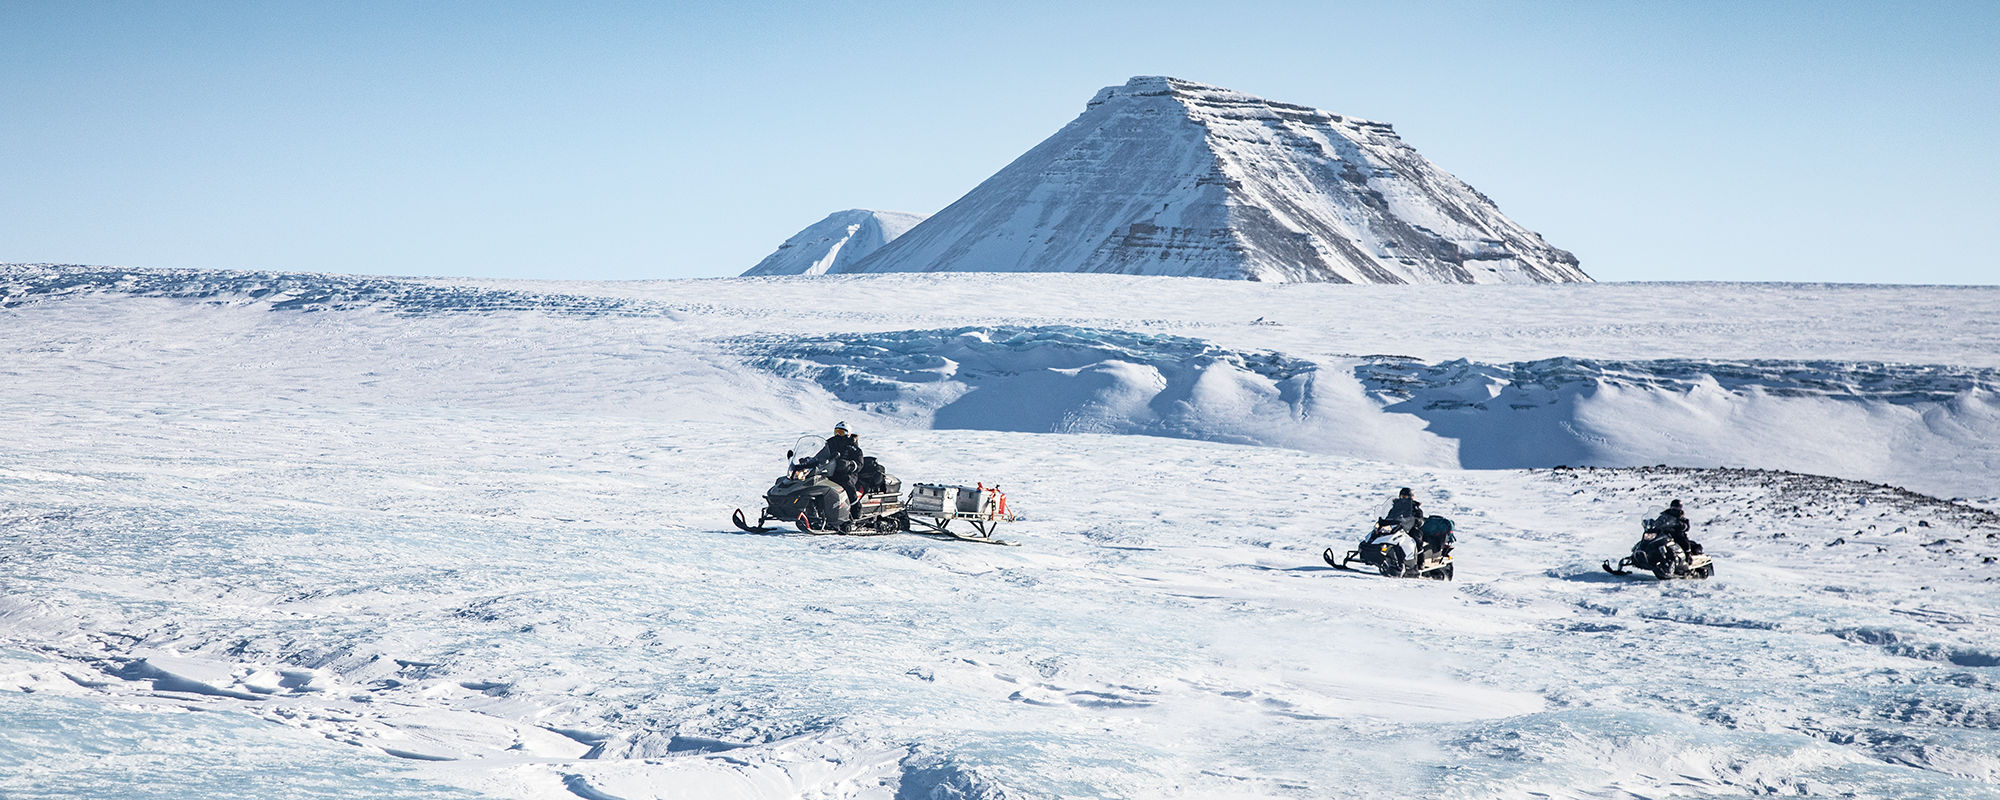 Experience Svalbard in winter with snowscooter